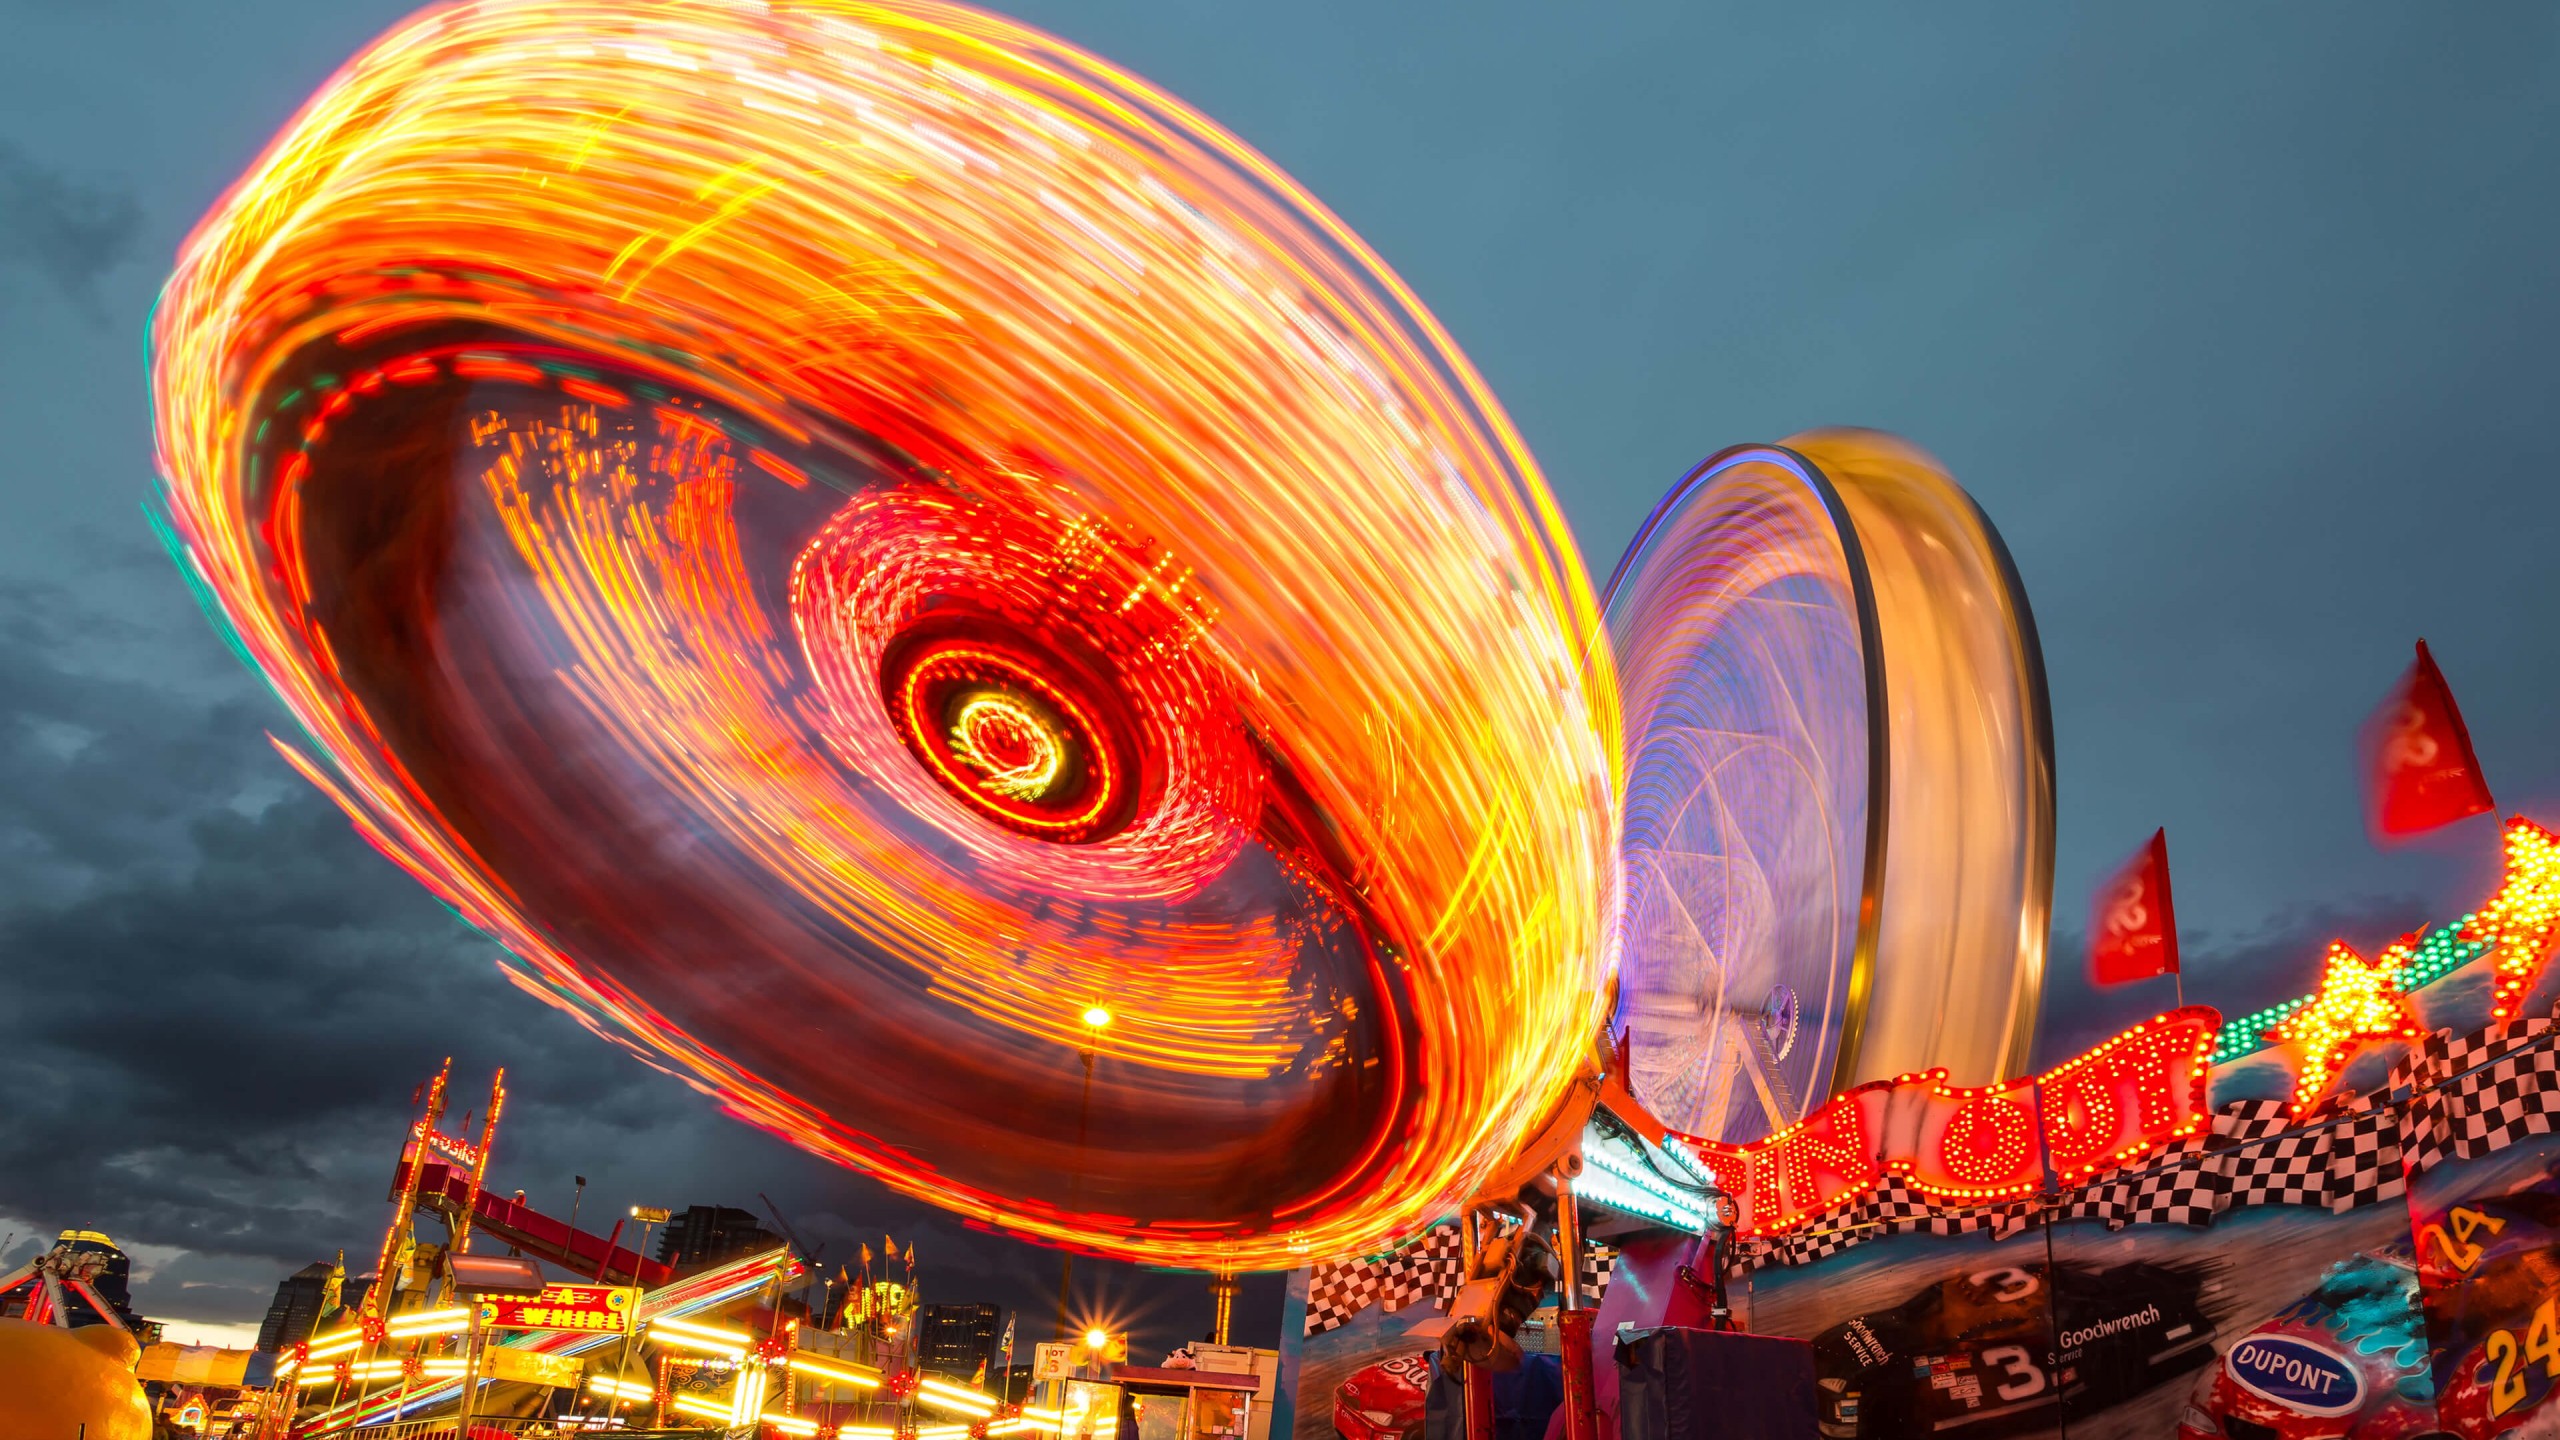 Download Calgary Stampede Lights HD wallpaper for 2560 x 1440 2560x1440